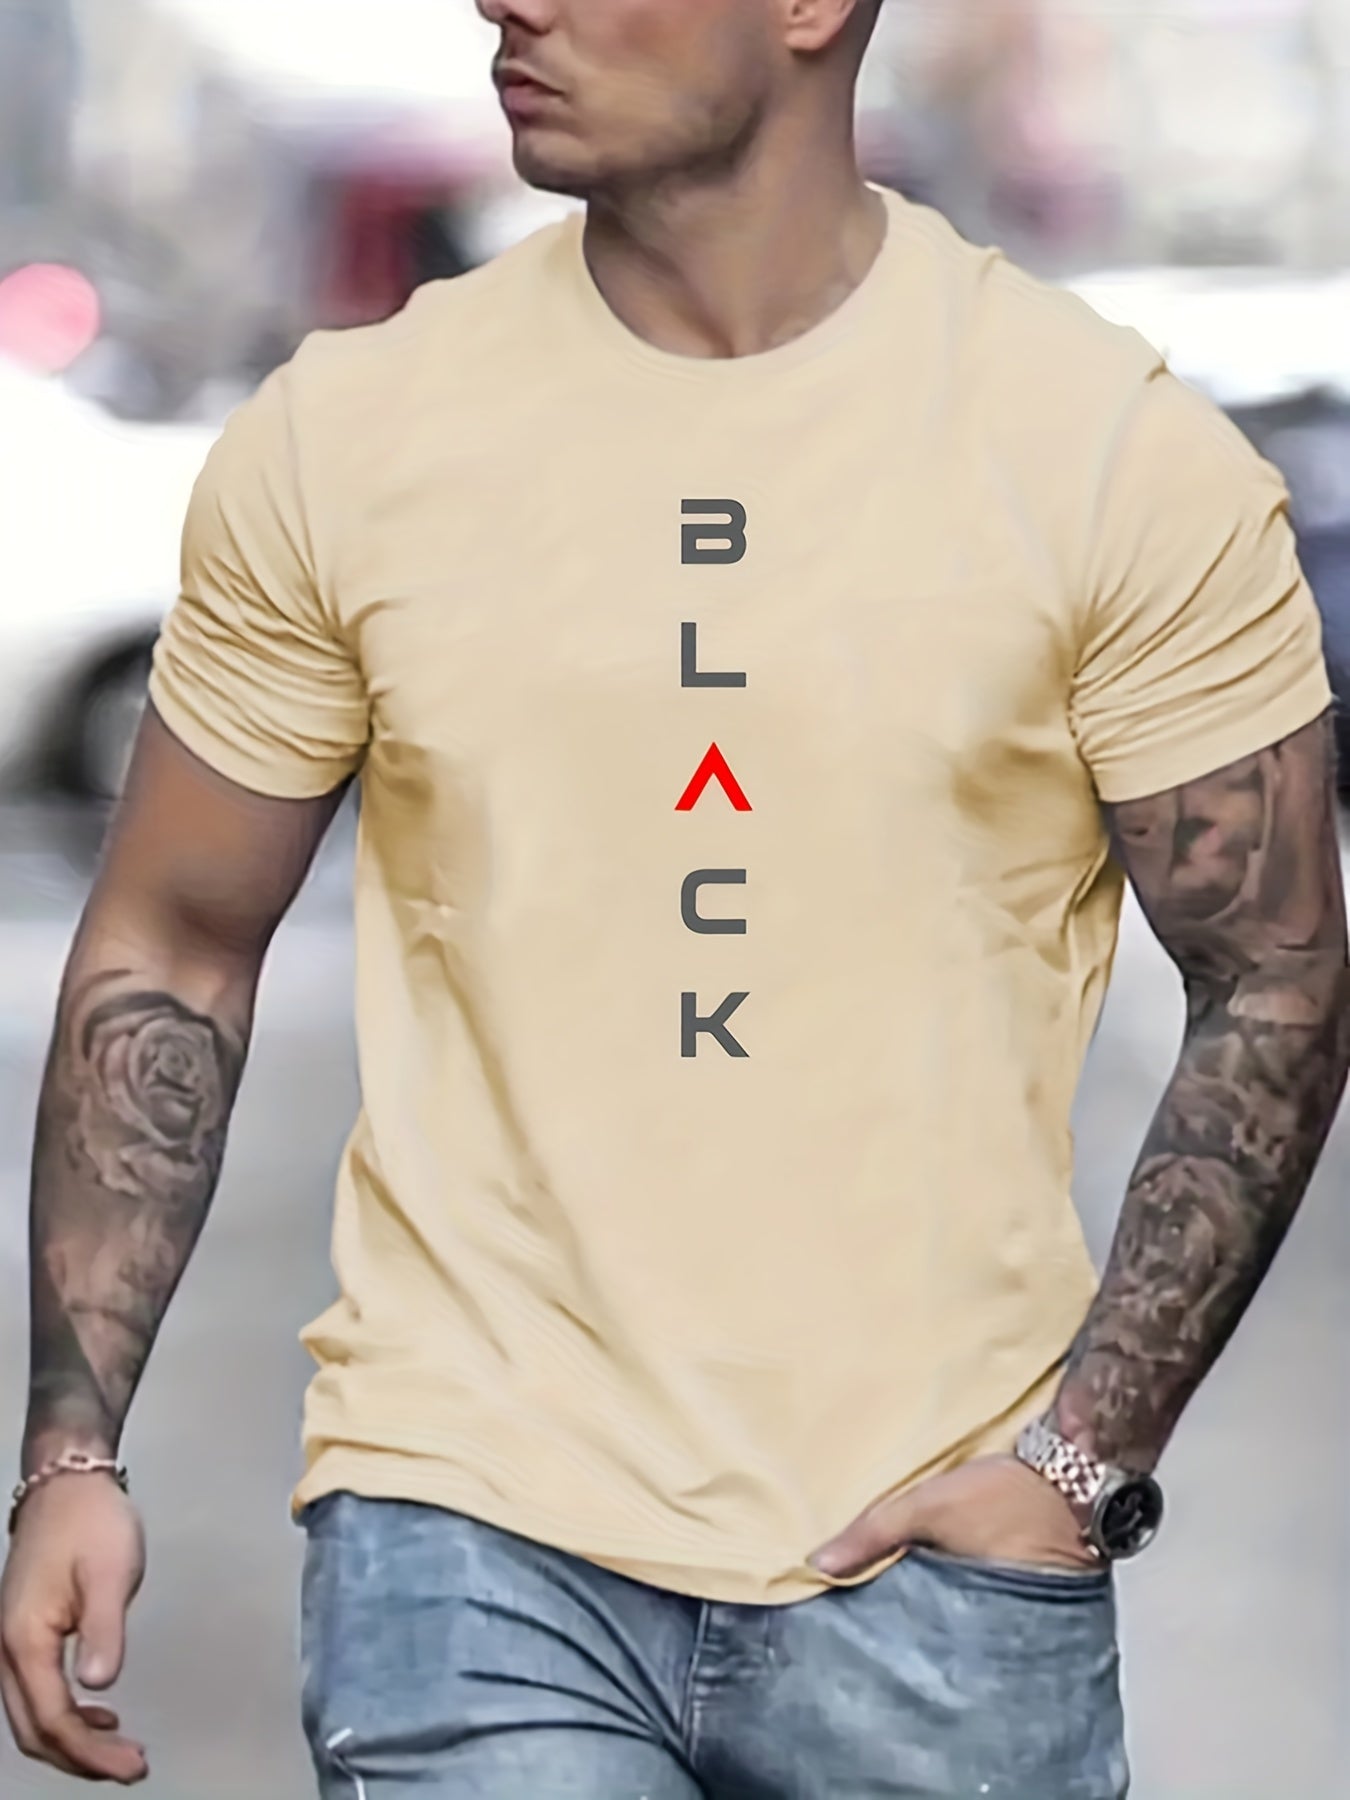 'Black' Print Tee Shirt, Tee For Men, Casual Short Sleeve T-shirt For Summer Spring Fall, Tops As Gifts